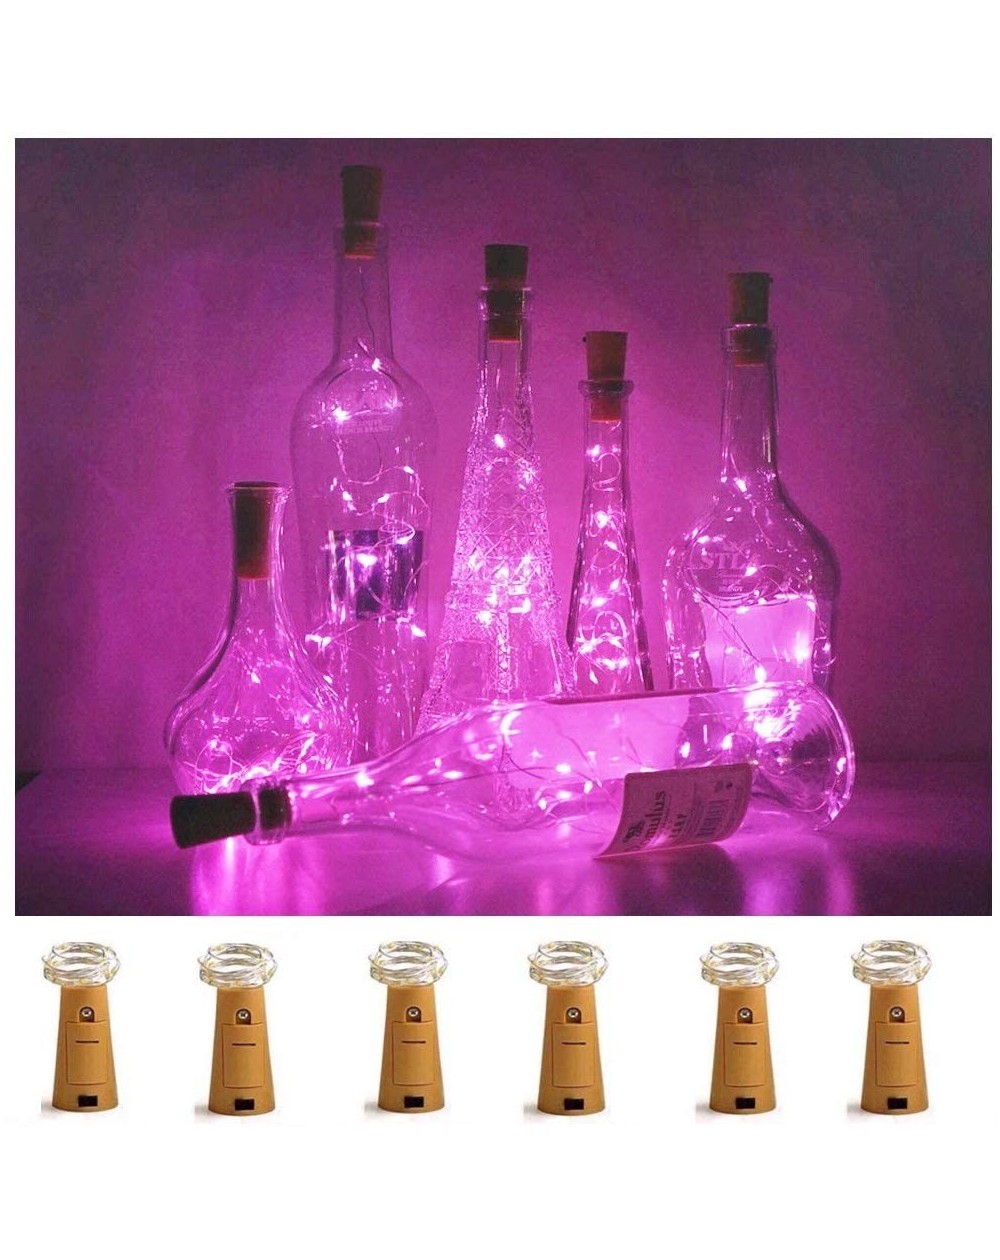 Outdoor String Lights Wine Bottle Lights with Cork- 6 Pack Battery Operated 15 LED Cork Shape Silver Wire Colorful Fairy Mini...